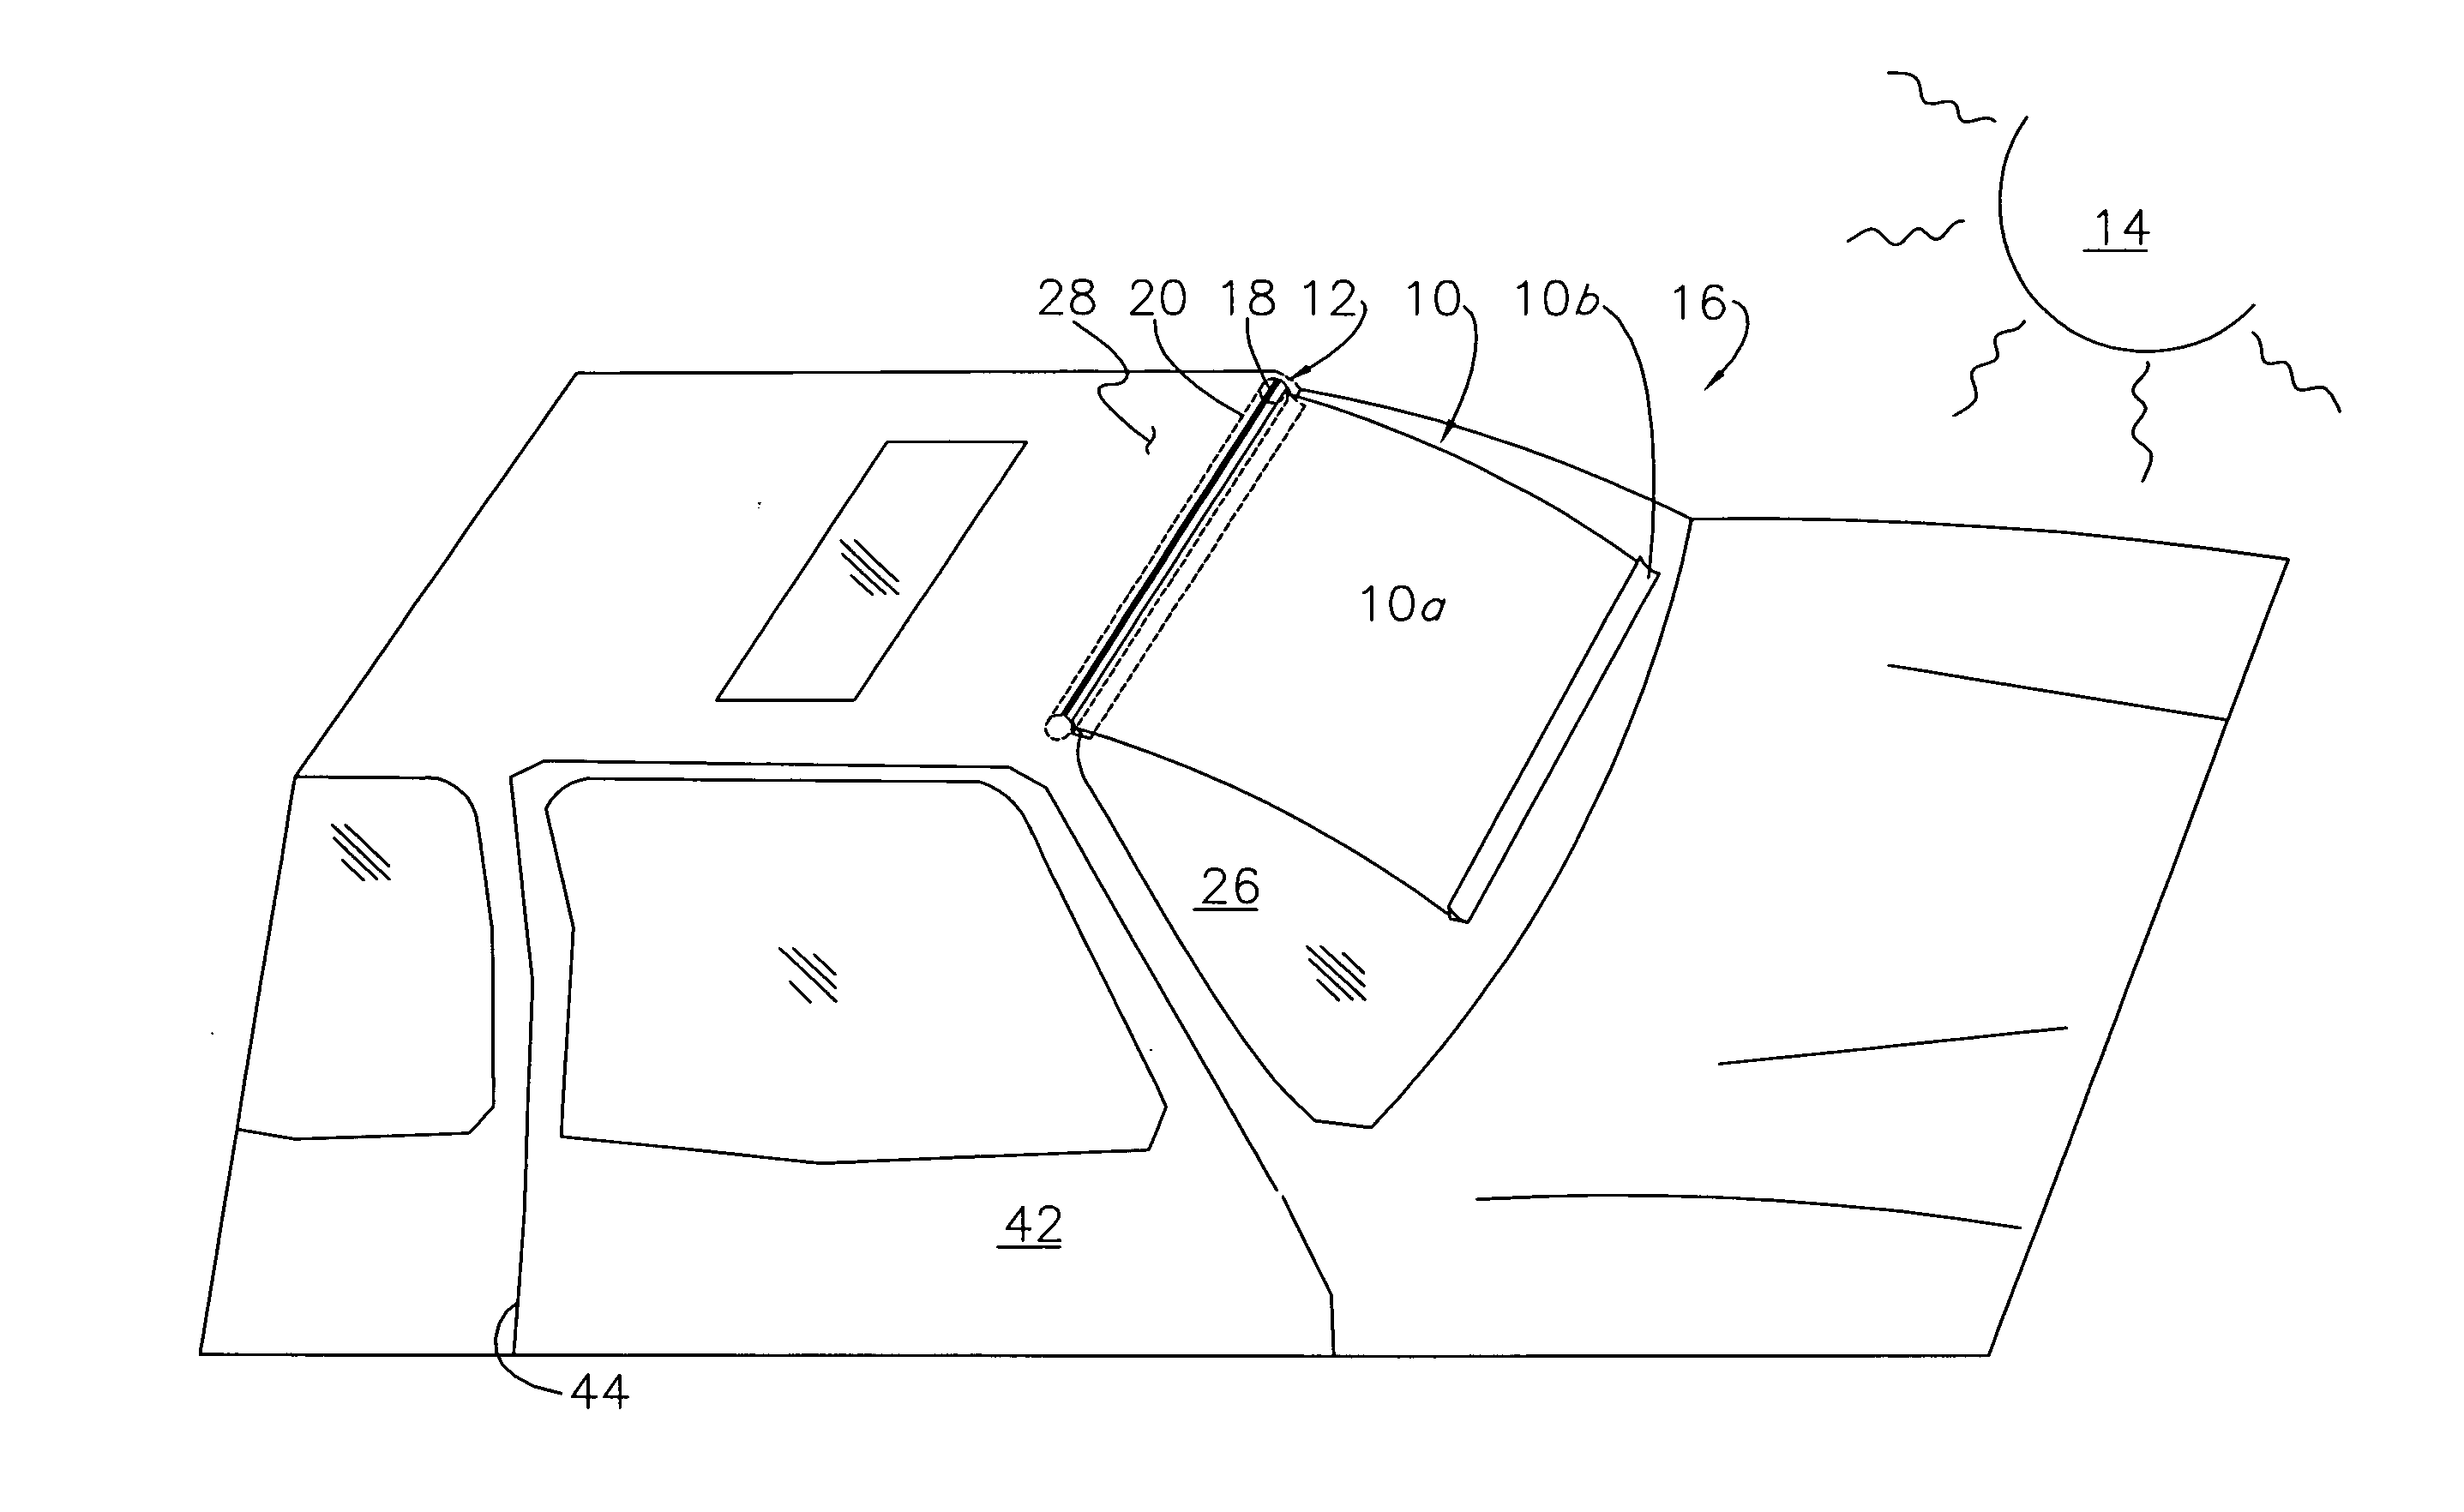 Methods of deploying a cover utilizing active material and an external heat source